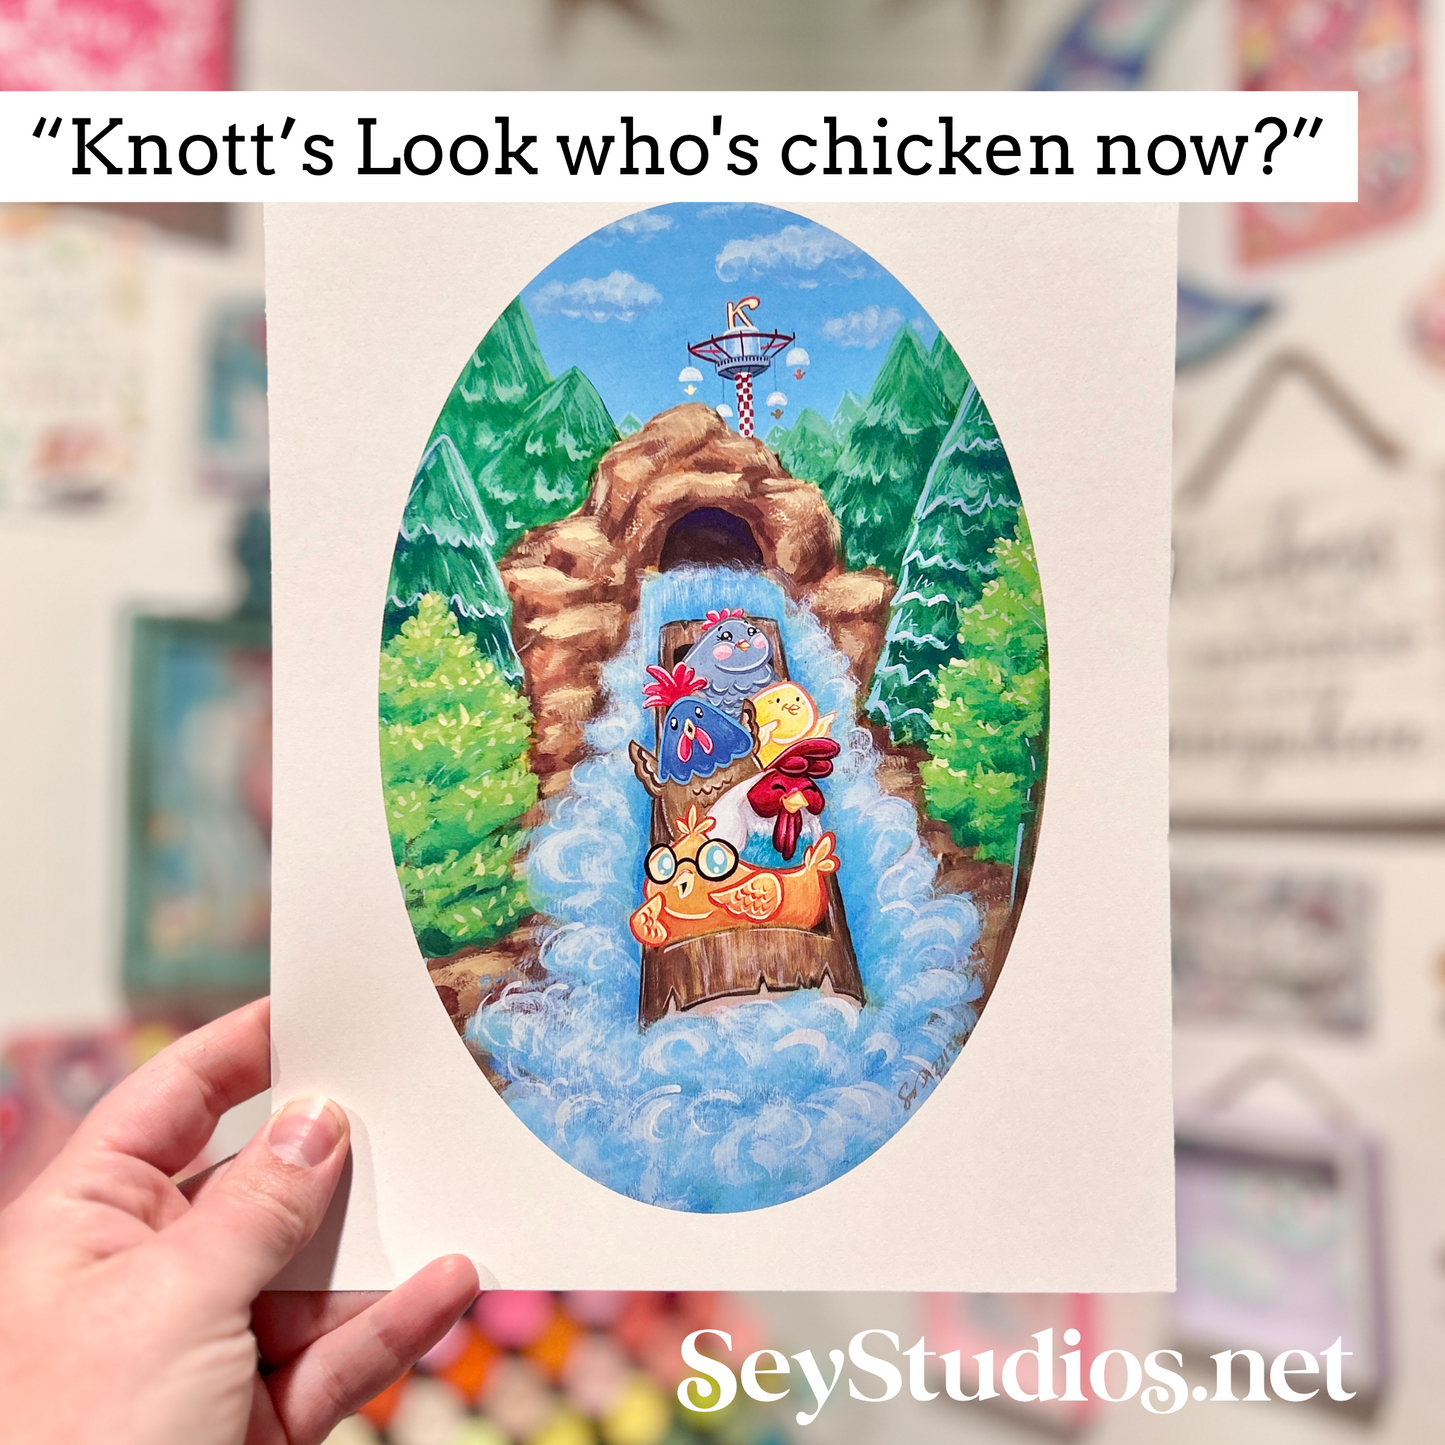 “Knott’s Look who's chicken now?” Limited Edition Signed Print